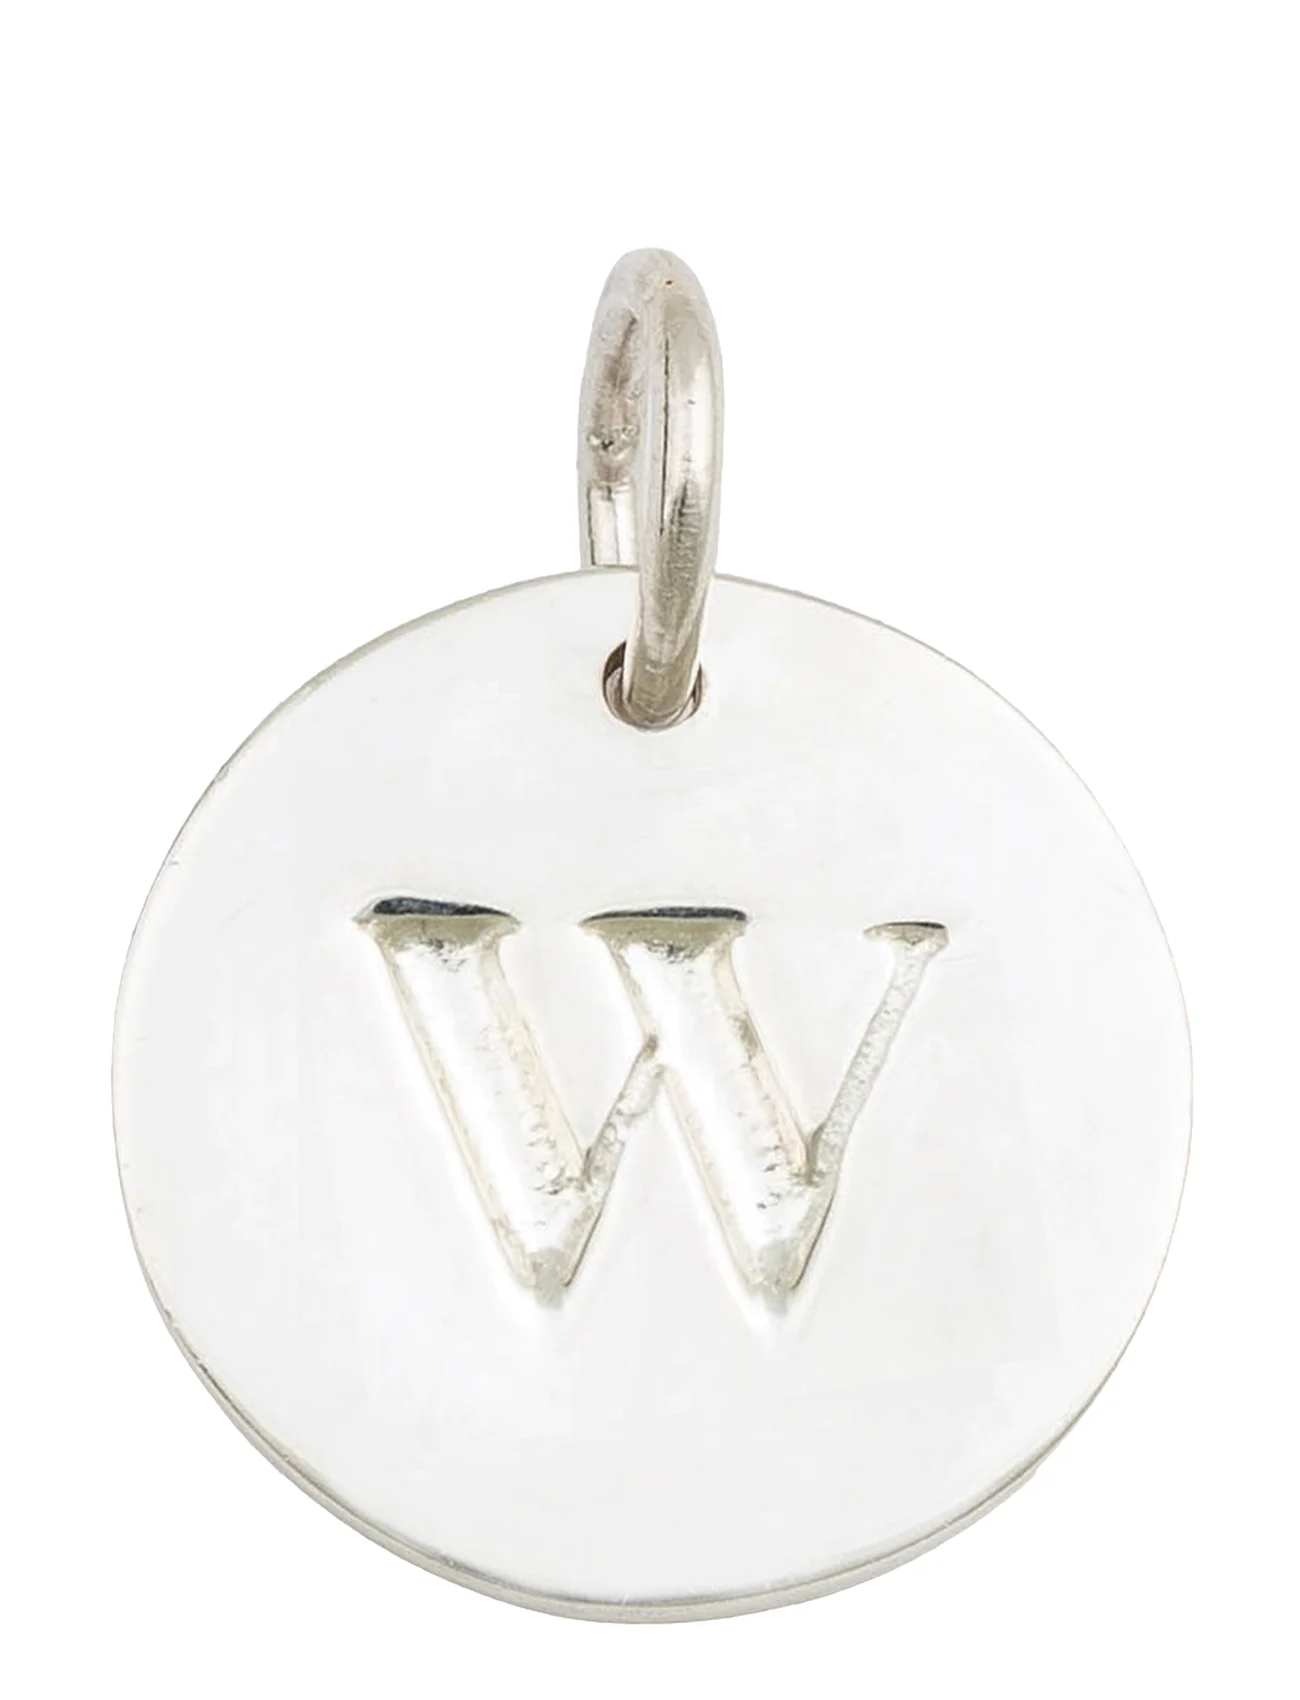 Syster P - Beloved Letter Silver - wisiorki - silver - 0